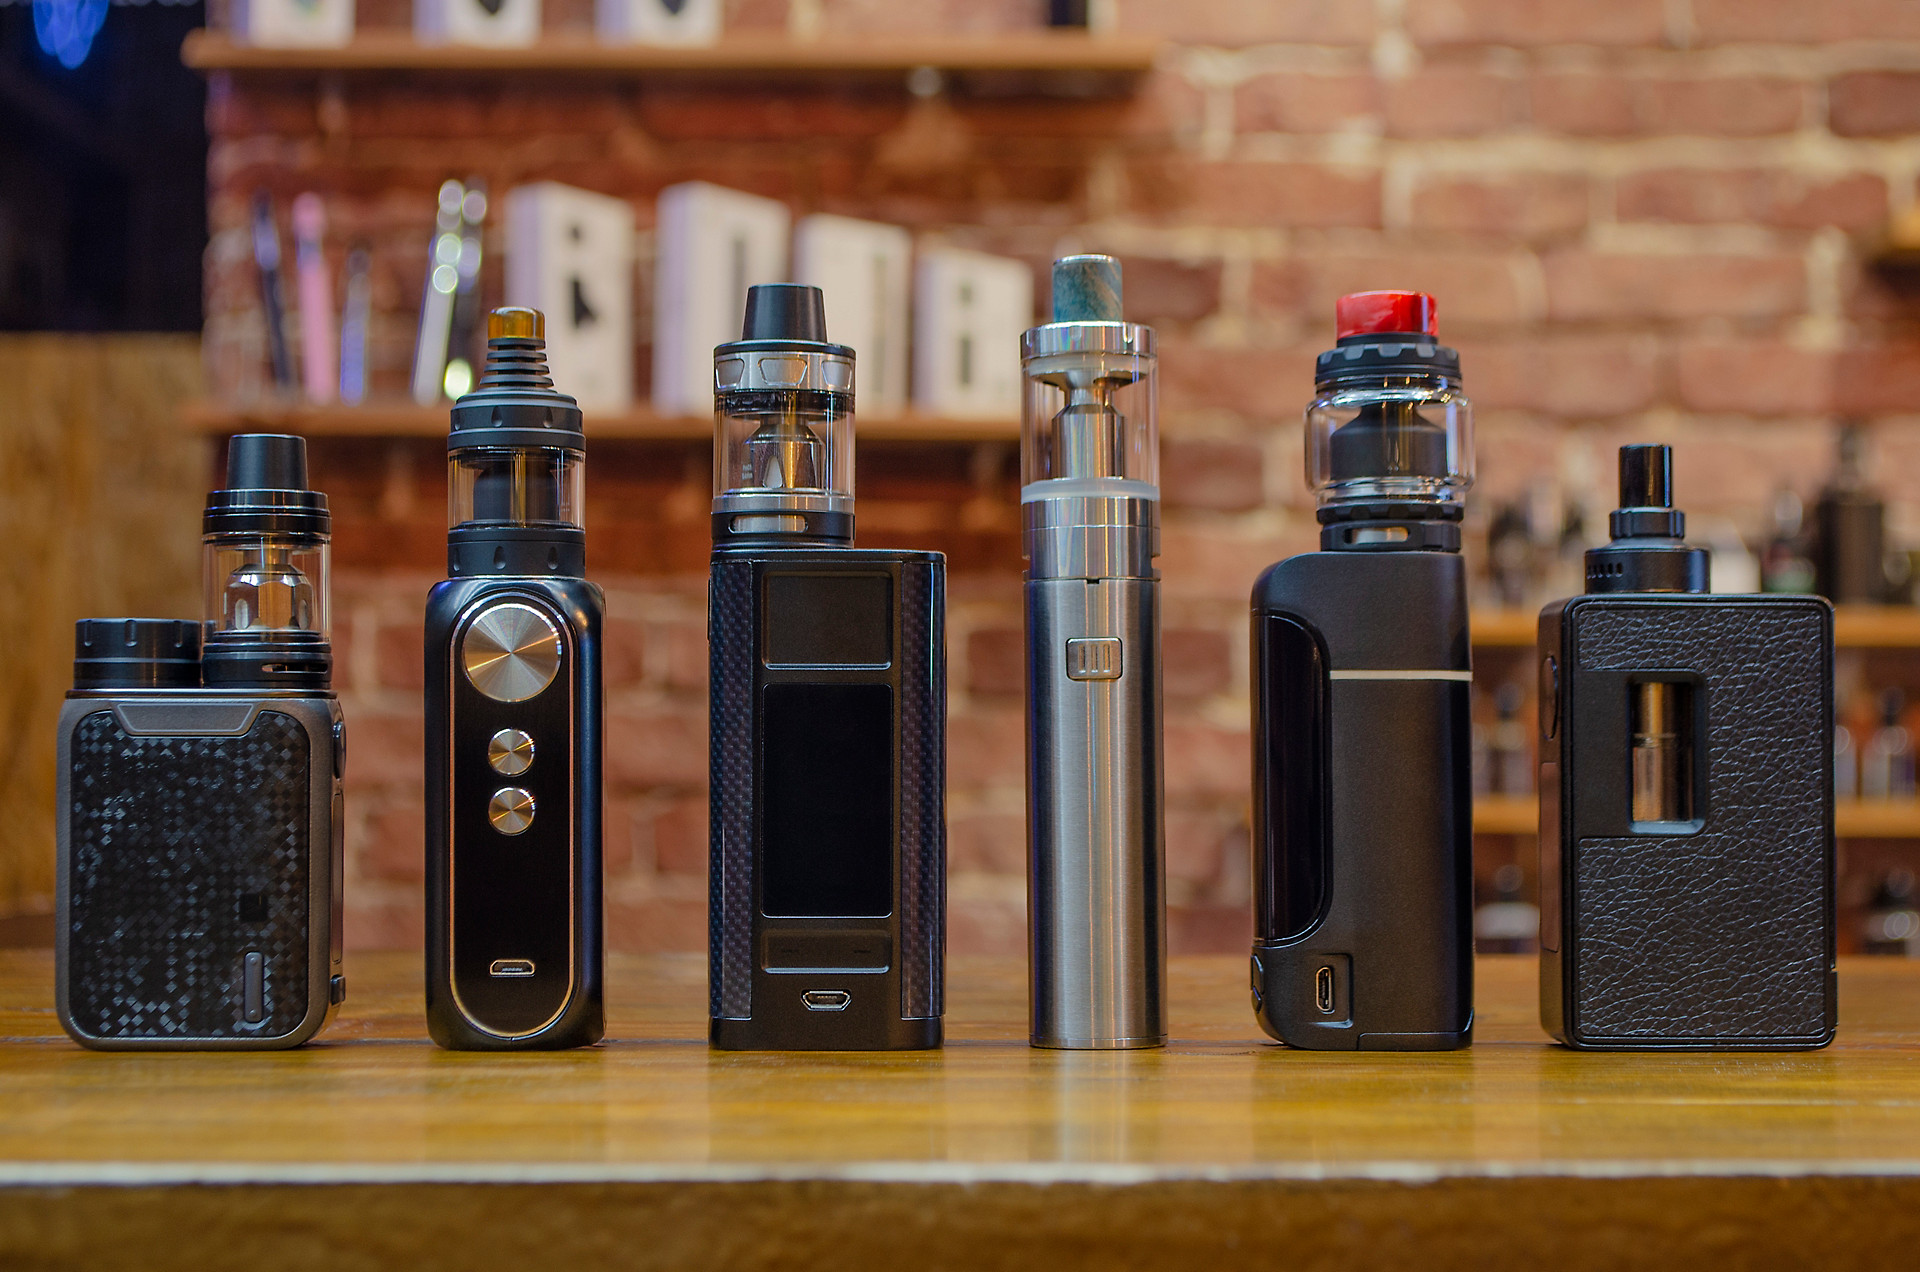 Six vape devices stand on a wooden counter, the background is blurred showing vapes on different shelves